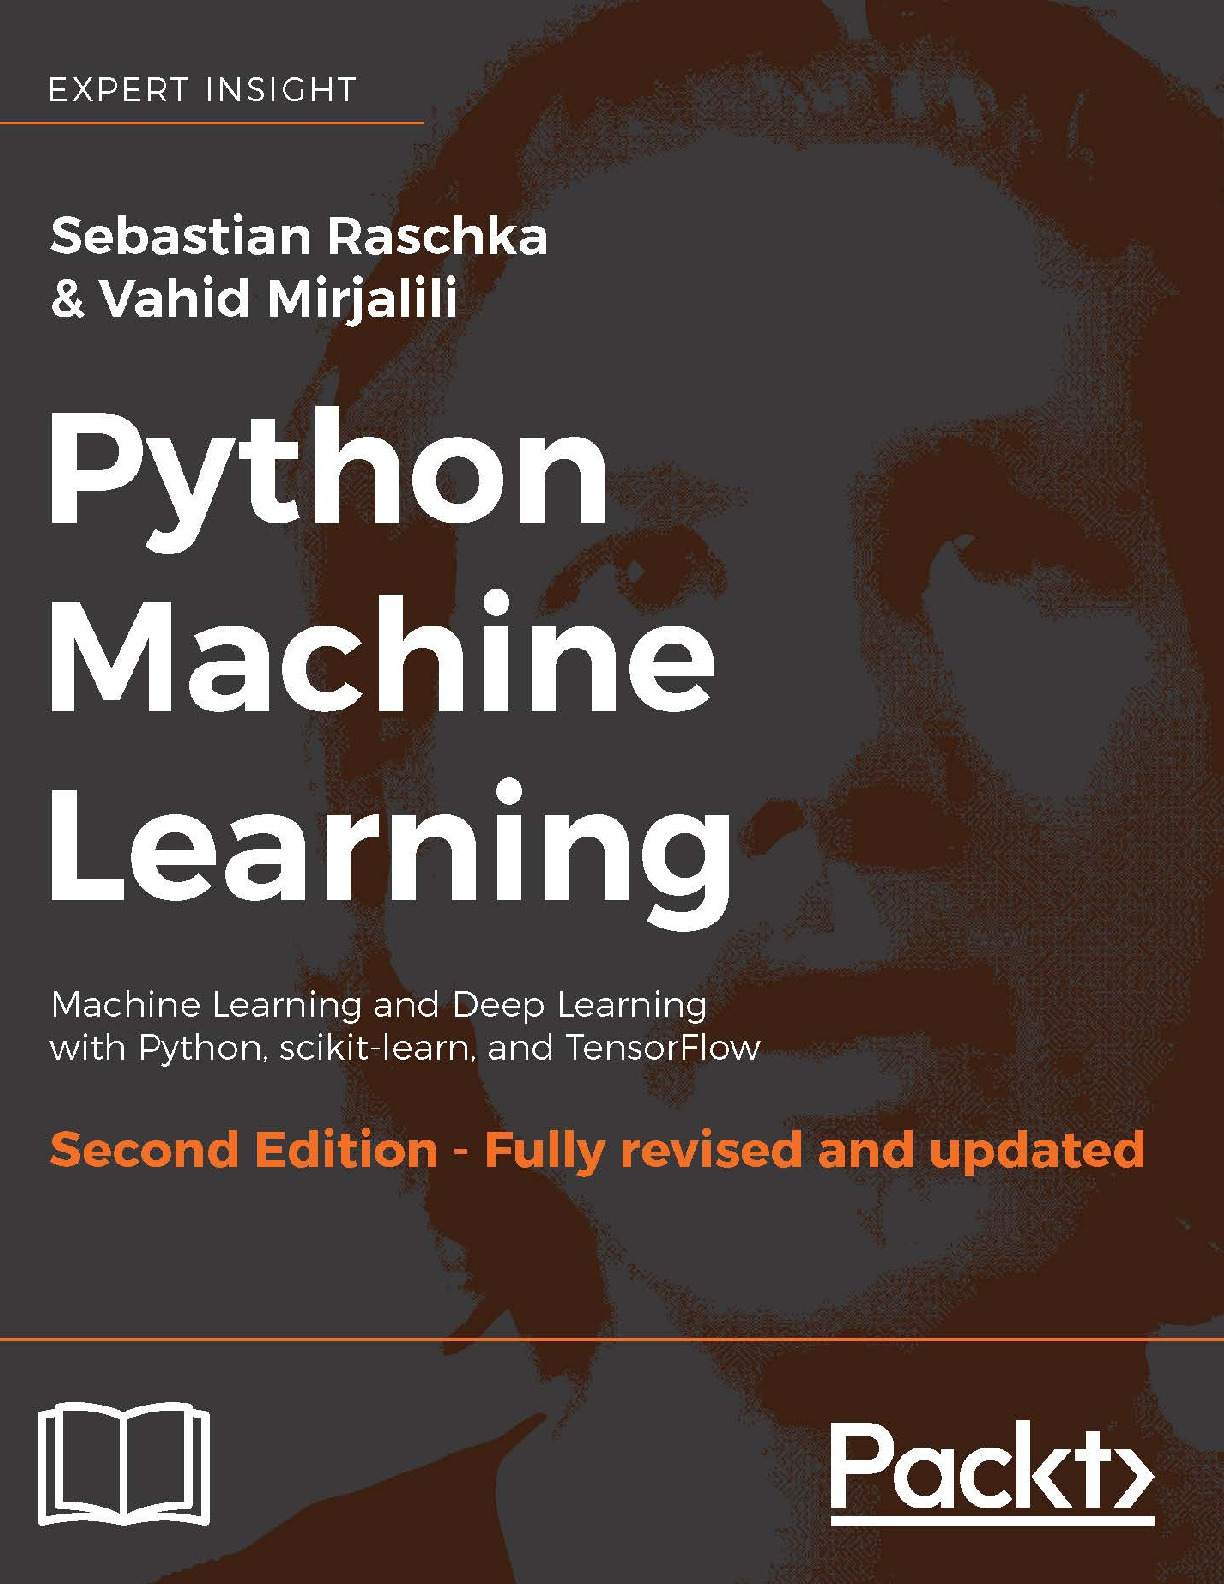 python_machine_learning_machine_learning_and_deep_learning_with_python_scikit-learn_and_tensorflow_2nd_edition_pdfdrive.com_